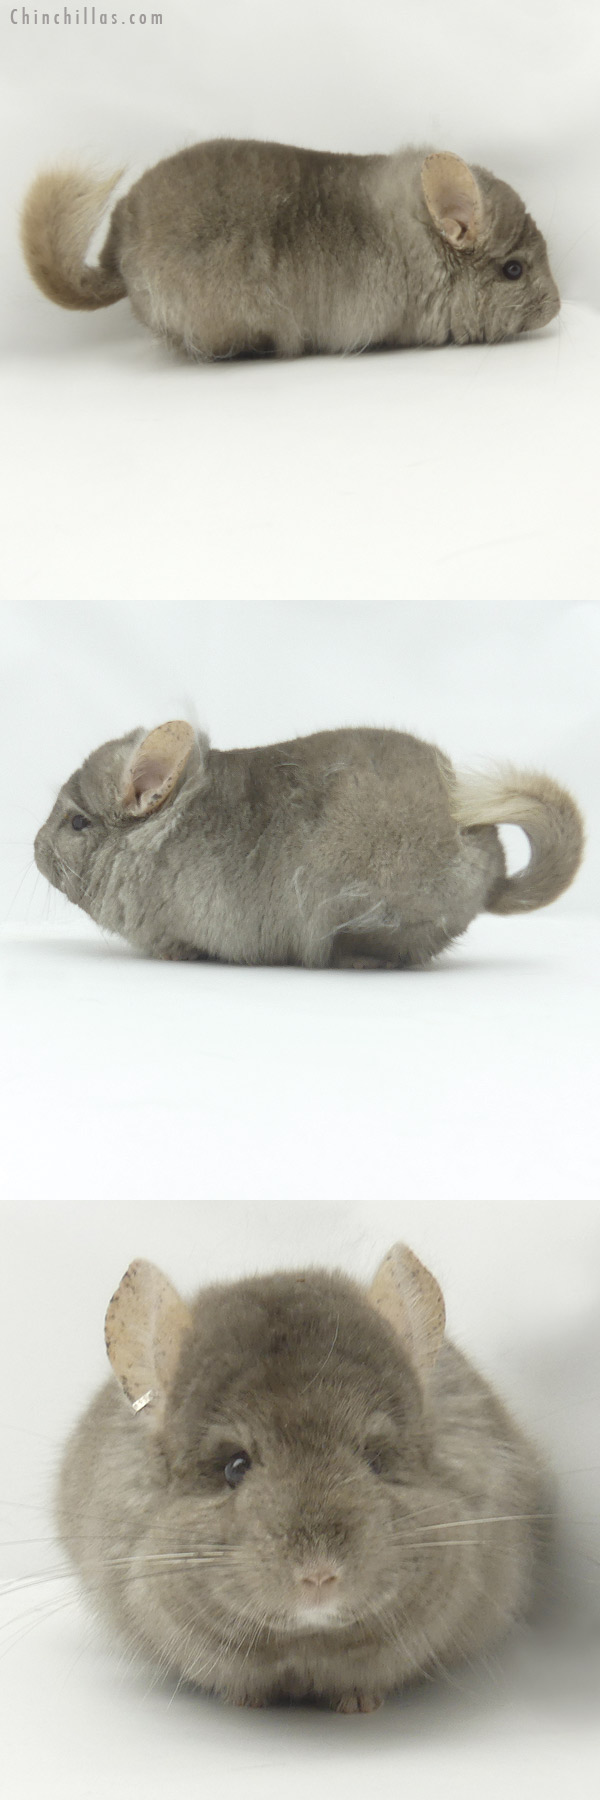 Chinchilla or related item offered for sale or export on Chinchillas.com - 19400 Tan  Royal Persian Angora Male Chinchilla